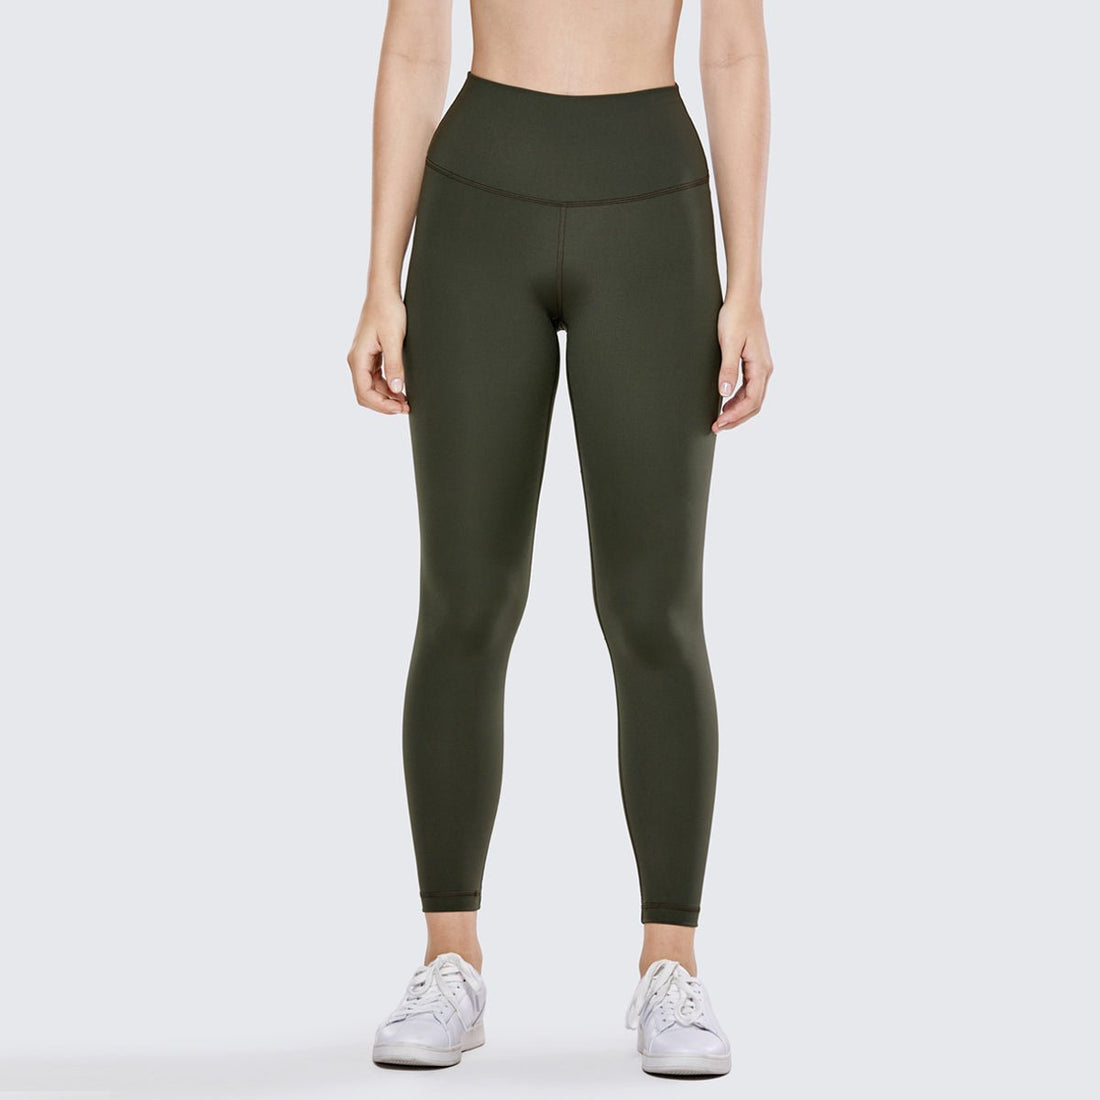 Micro-massage Compression Thick High Waisted Green Workout Leggings - 0cm